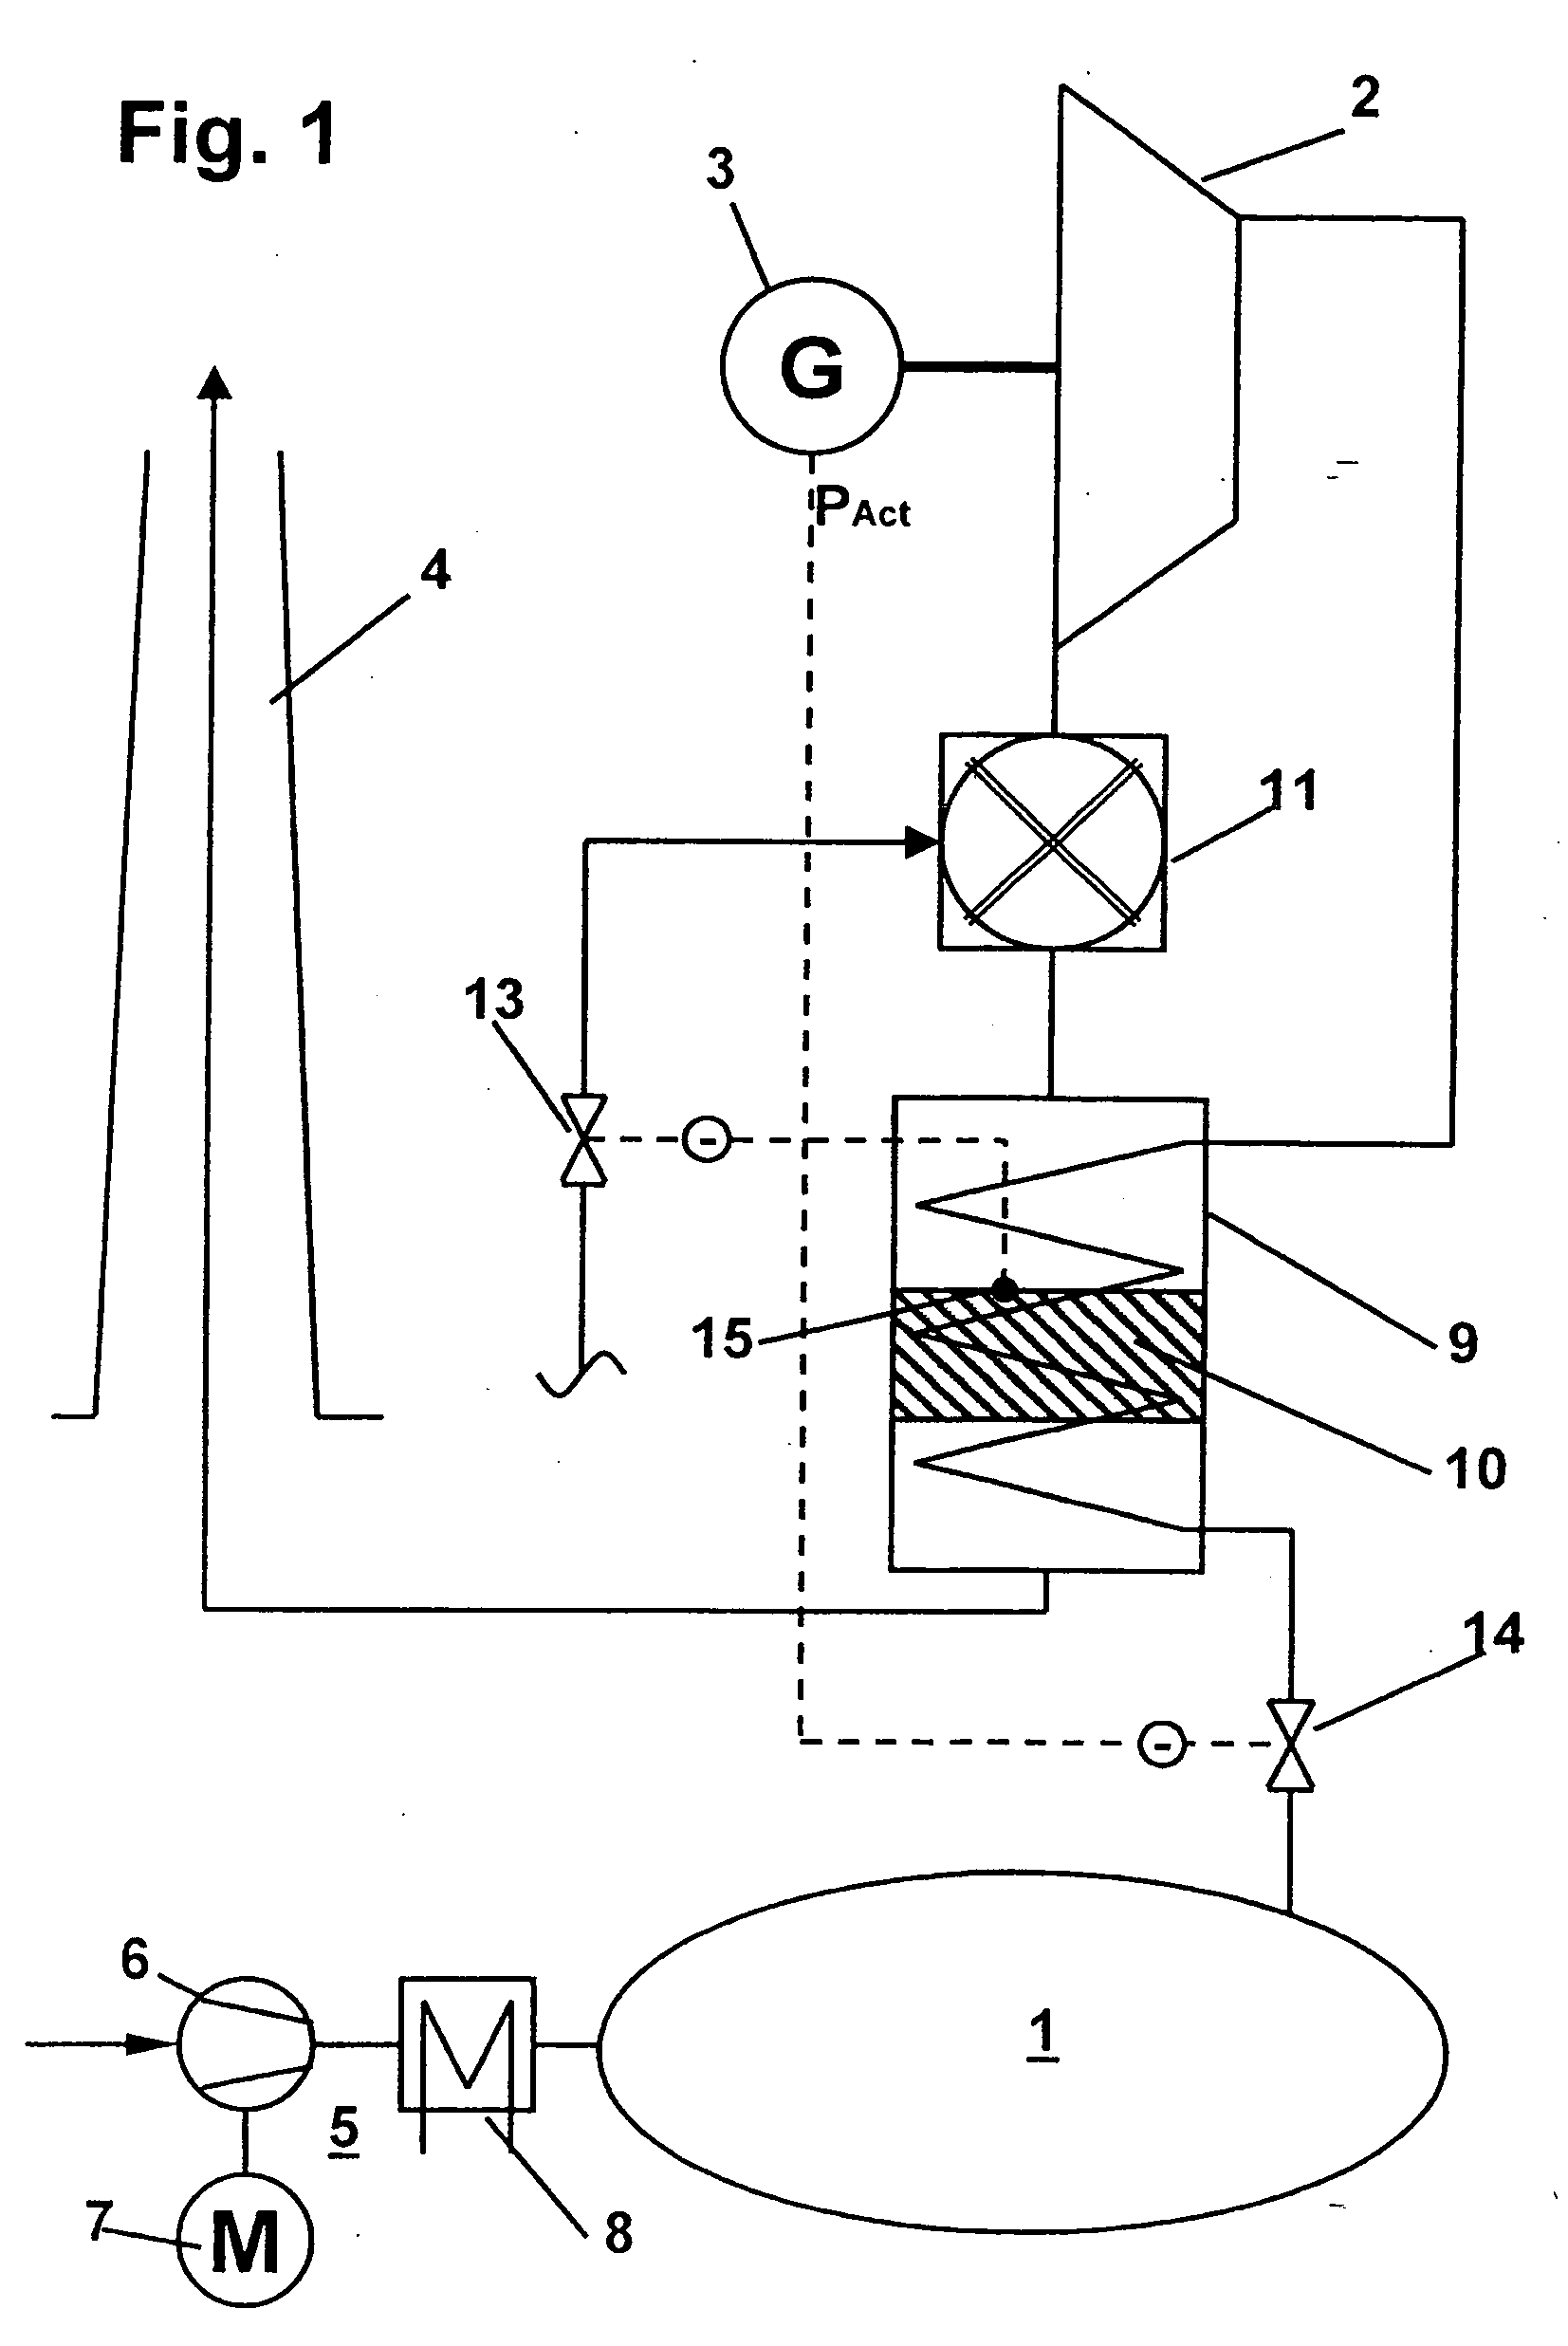 Method for operation of a power generation plant